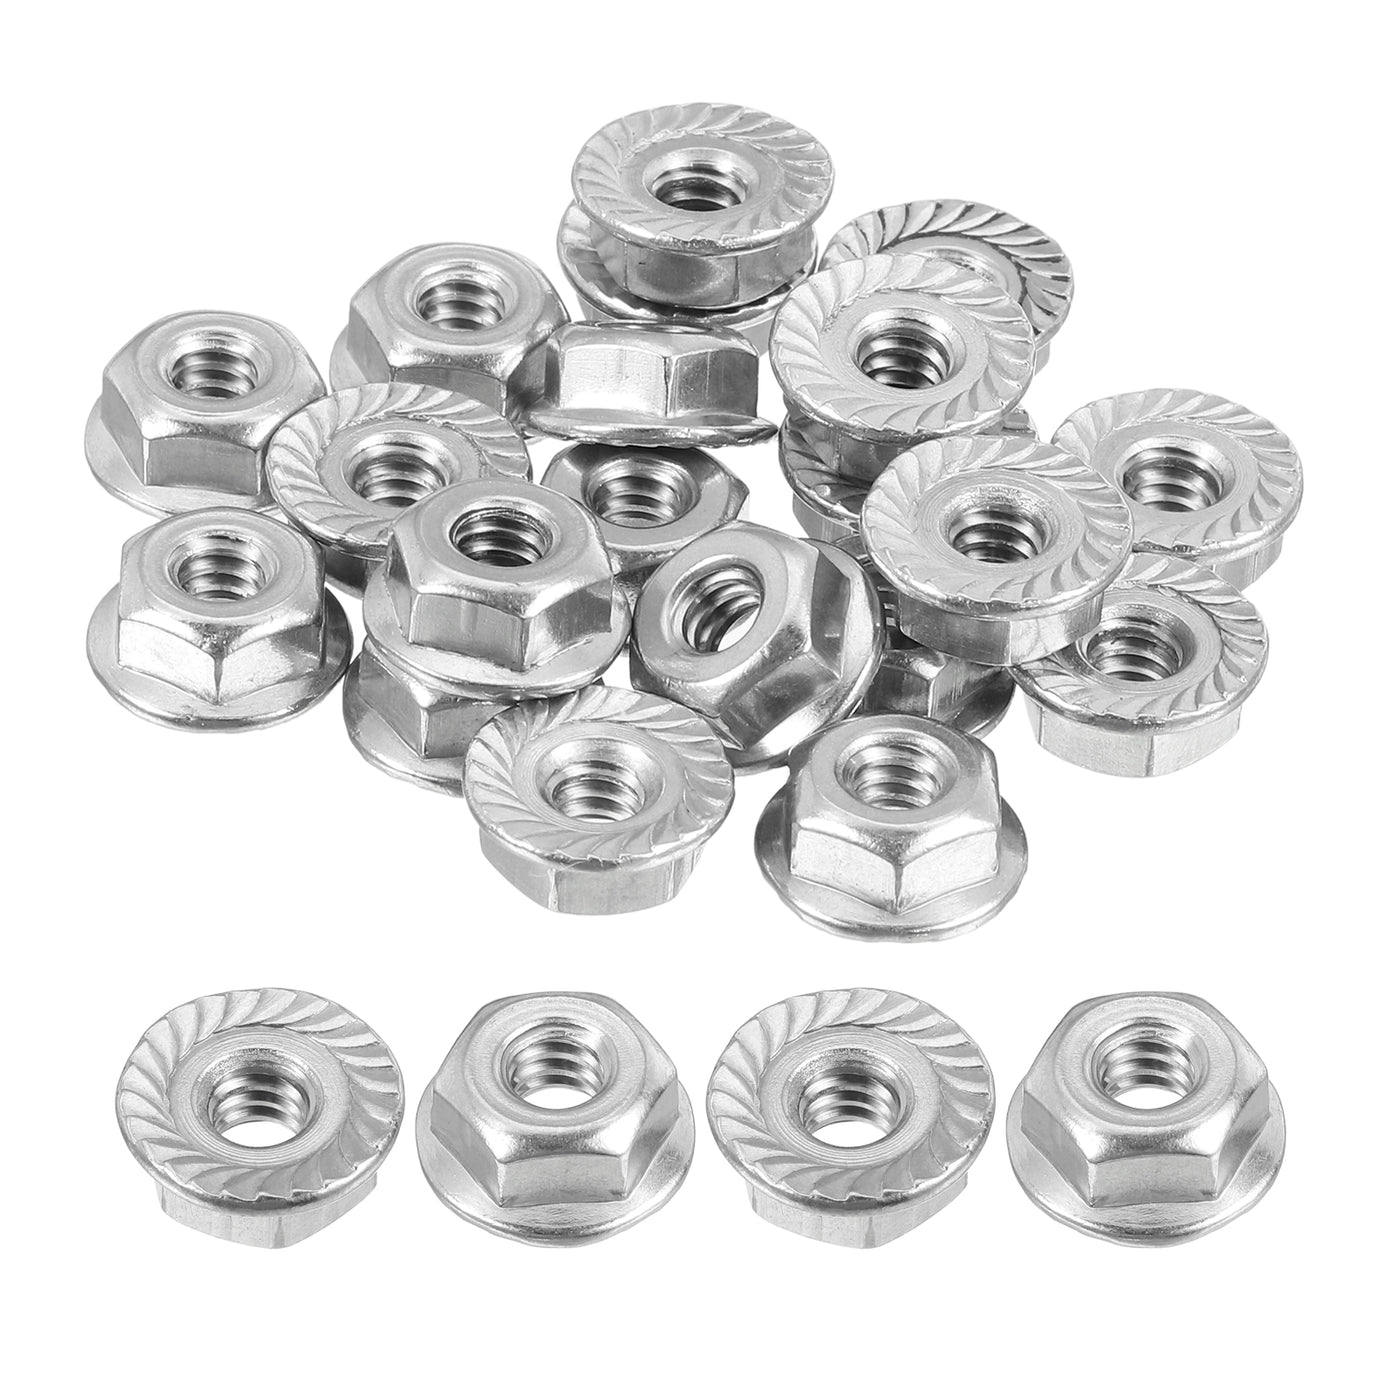 uxcell Uxcell #10-24 Serrated Flange Hex Lock Nuts, 25Pcs 304 Stainless Steel Flange Nut